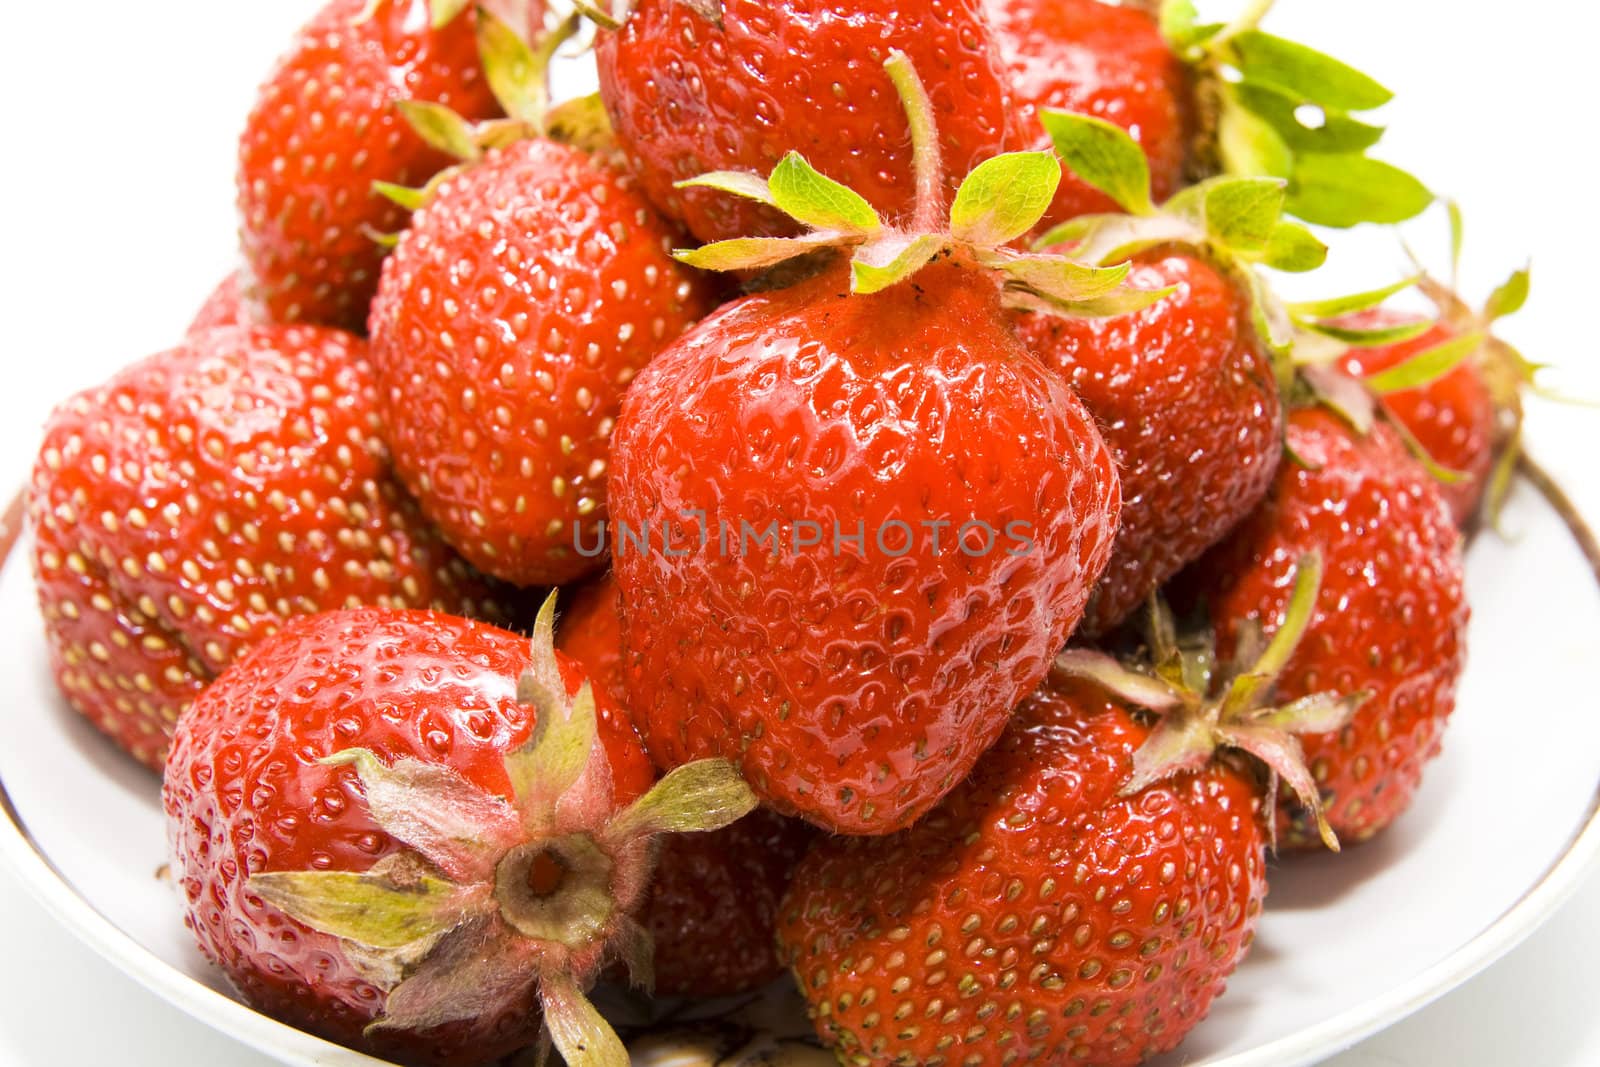 Close up of a strawberry isolated on white background